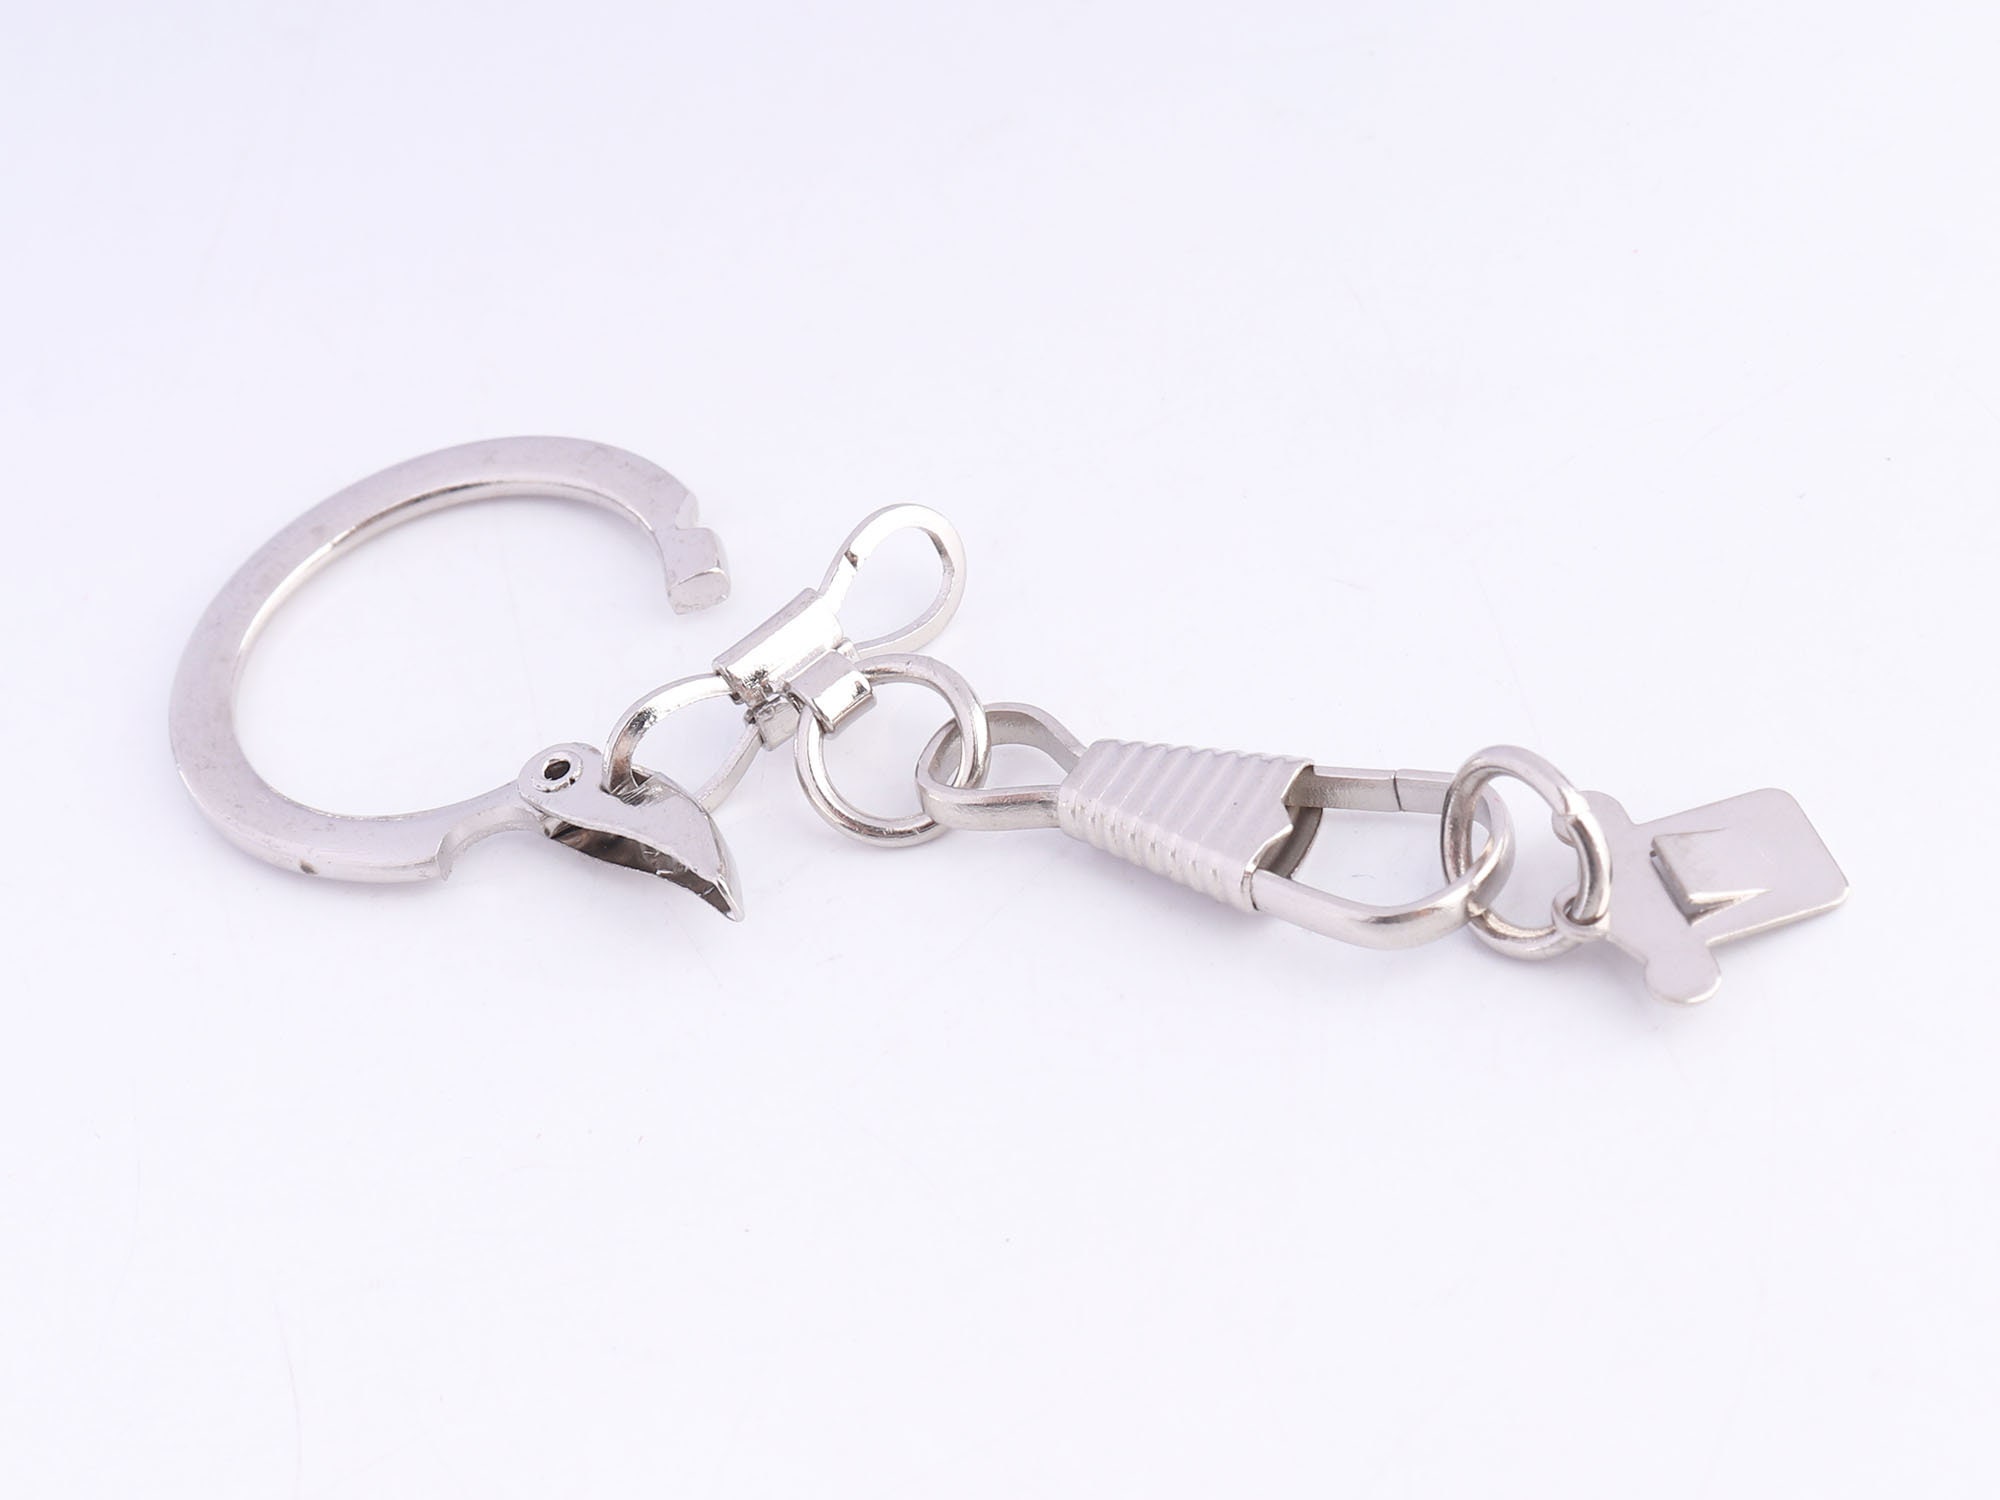 5 Stainless Steel Key Ring Holders With Extender Chain F633 